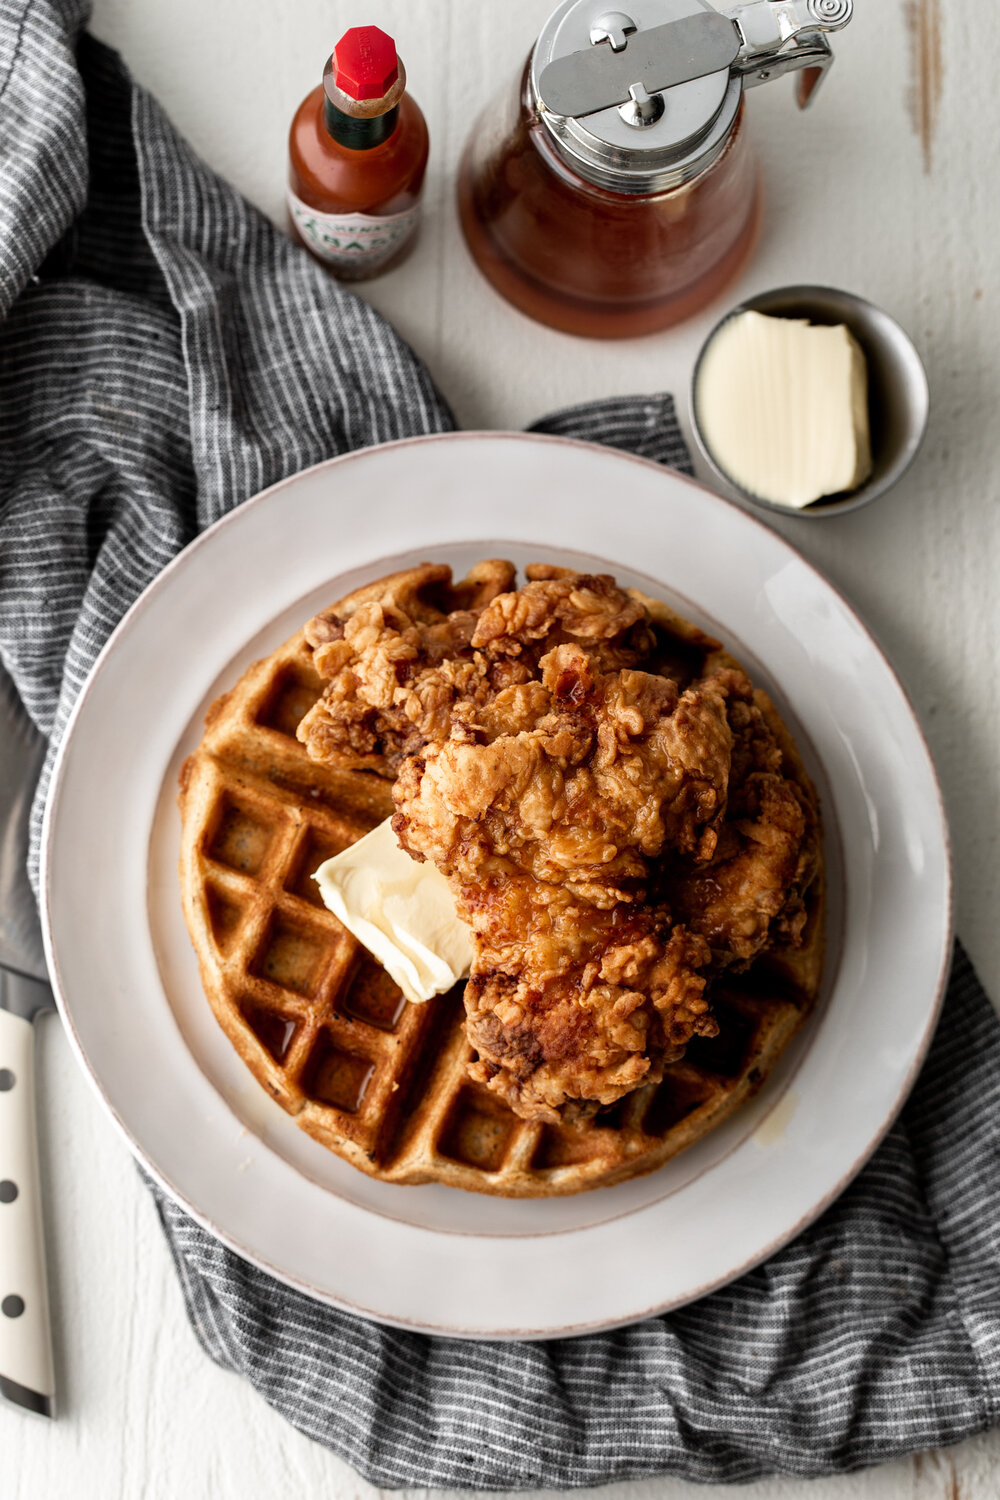 Fried chicken and waffles sweetened with a hint of cinnamon and served with hot sauce maple syrup is the ultimate sweet and savory meal